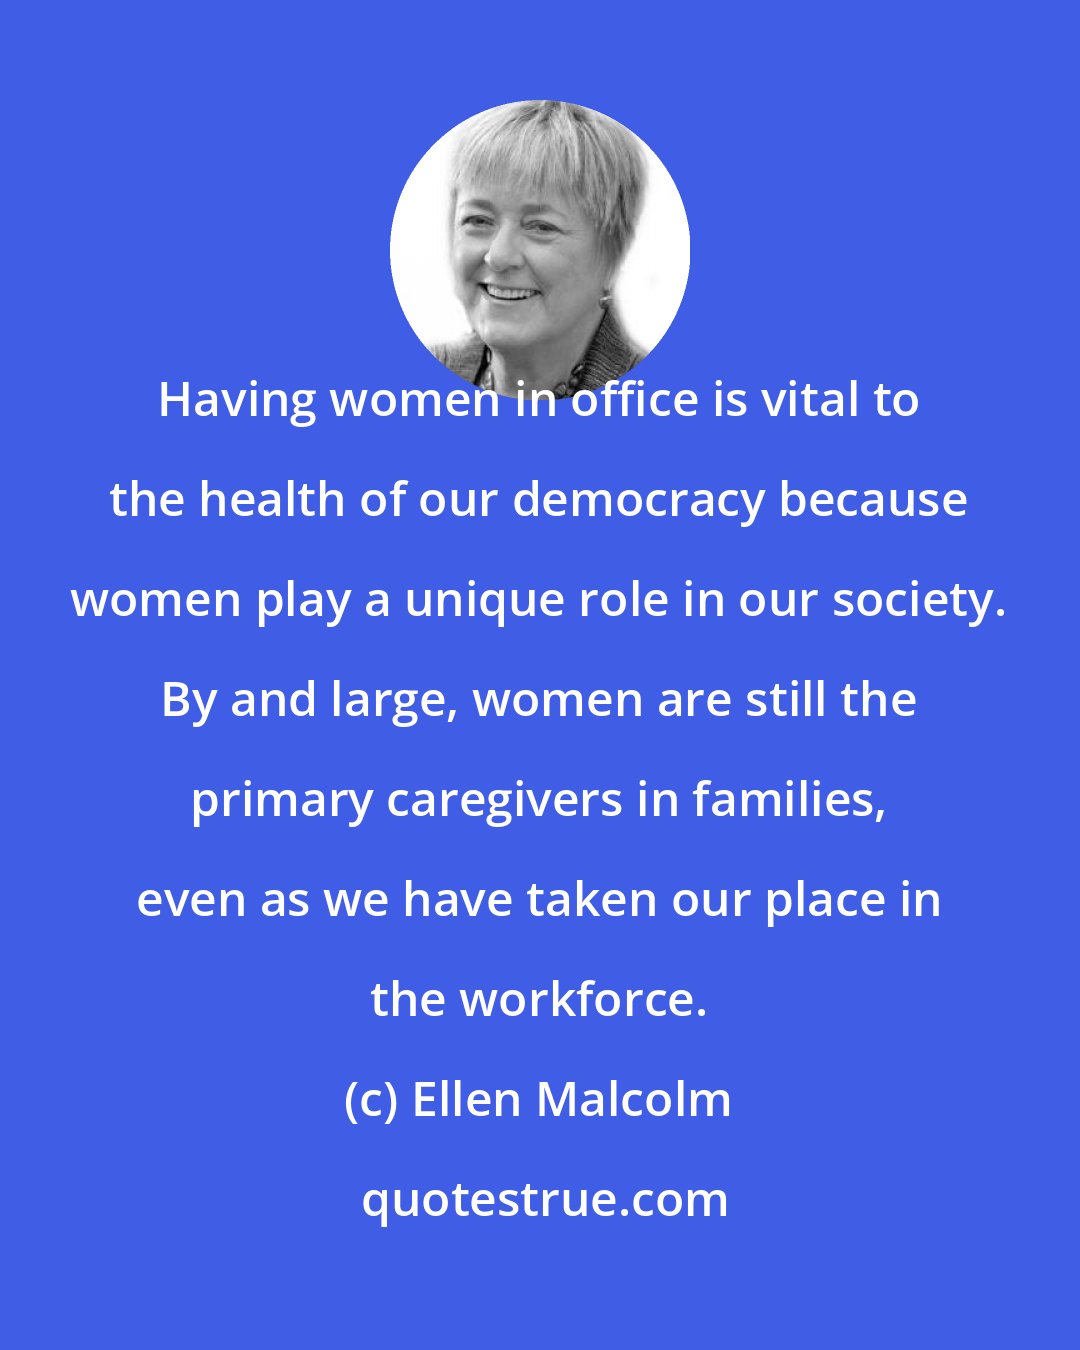 Ellen Malcolm: Having women in office is vital to the health of our democracy because women play a unique role in our society. By and large, women are still the primary caregivers in families, even as we have taken our place in the workforce.